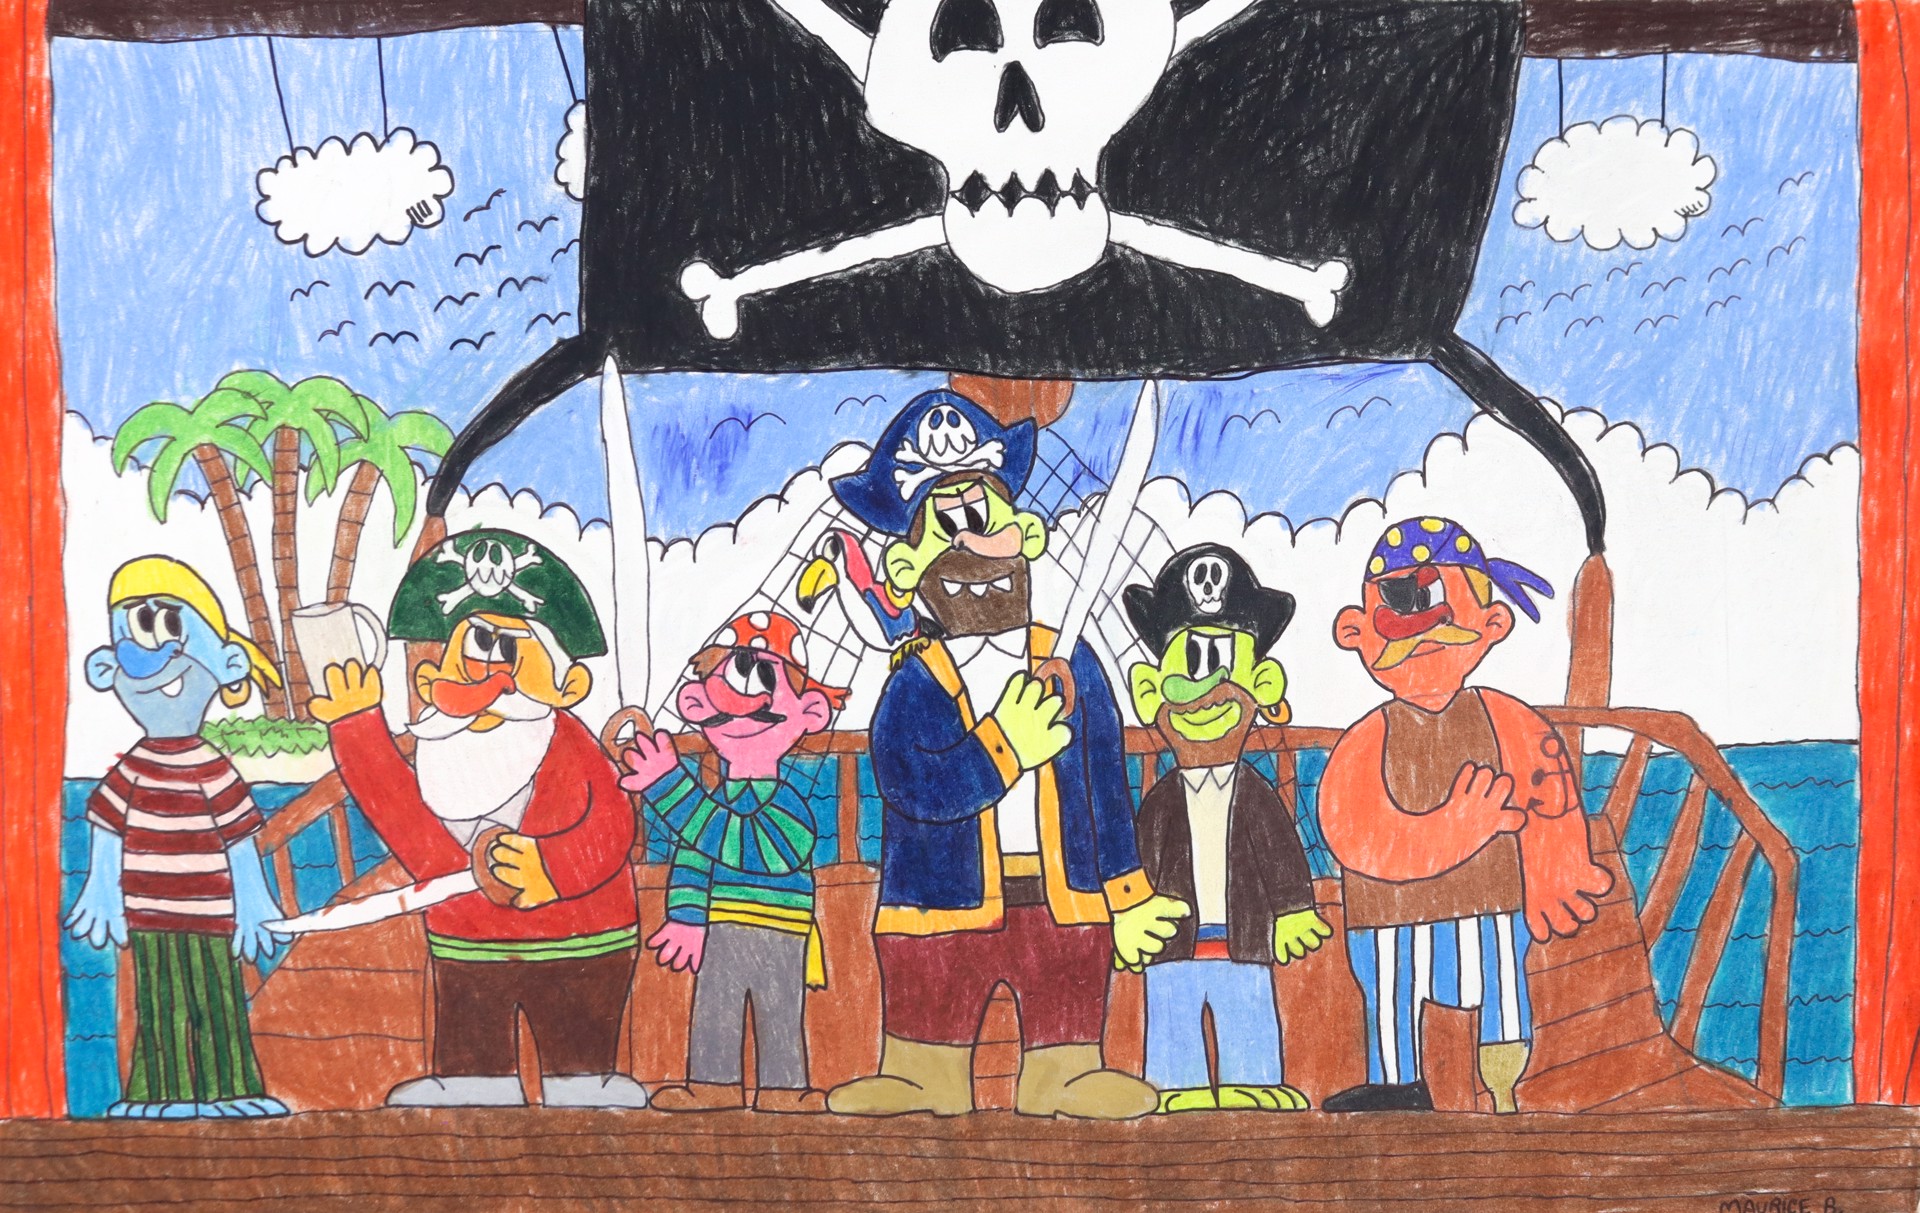 The Pirate Ship by Maurice Barnes